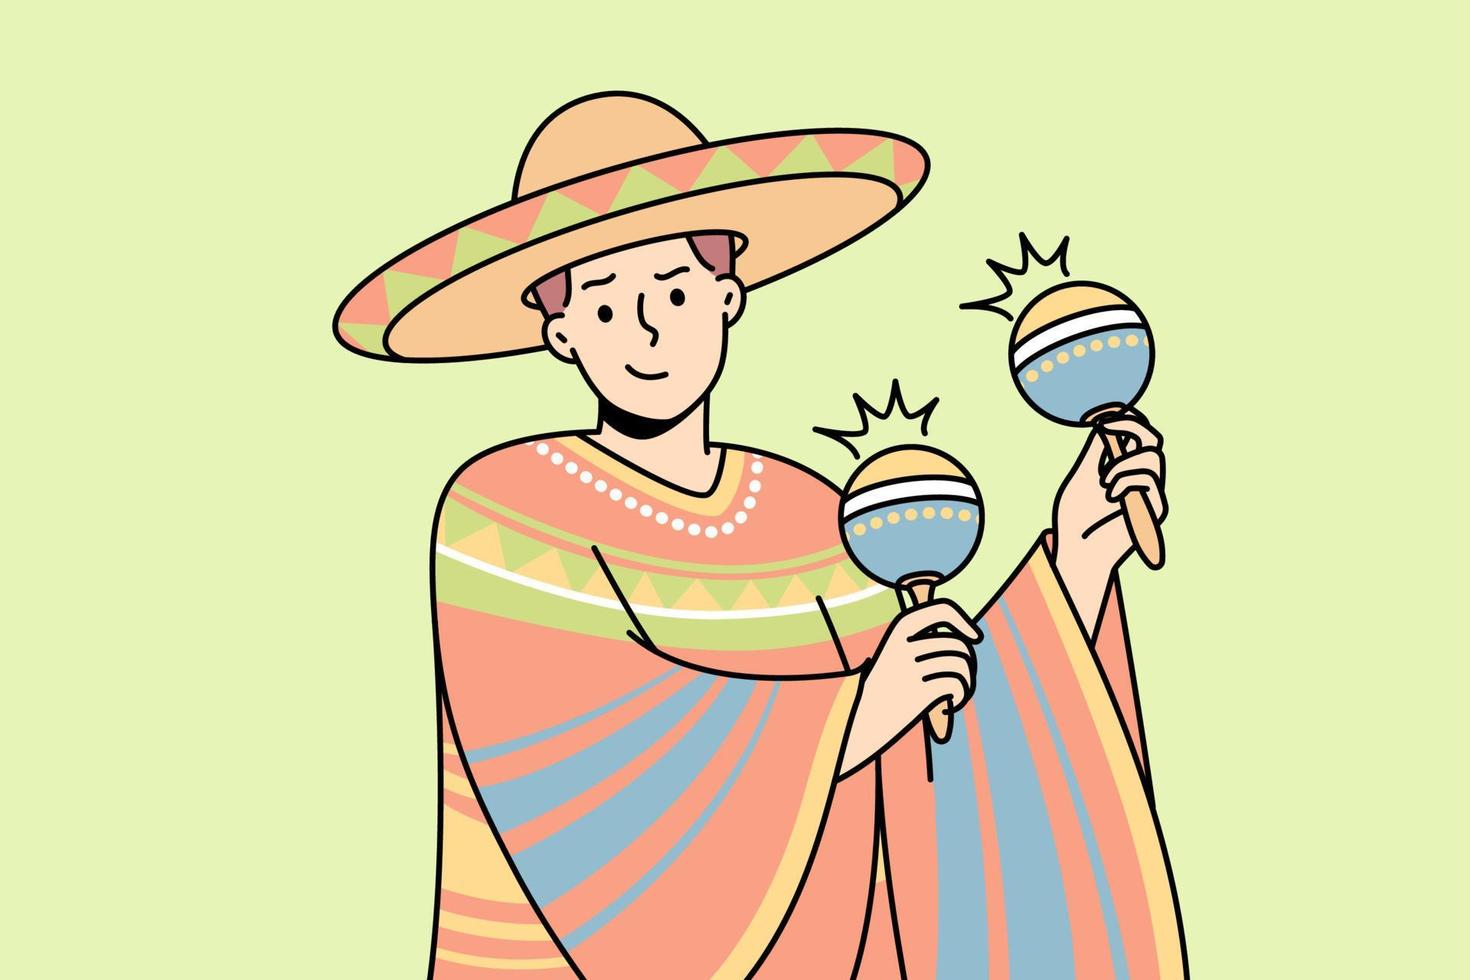 Latino man in national costume, sombrero plays maracas. Guy in traditional mexican outfit, wide-brimmed hat, holds chac-chac, shakers or cuban rattles. Vector thin line colored illustration.